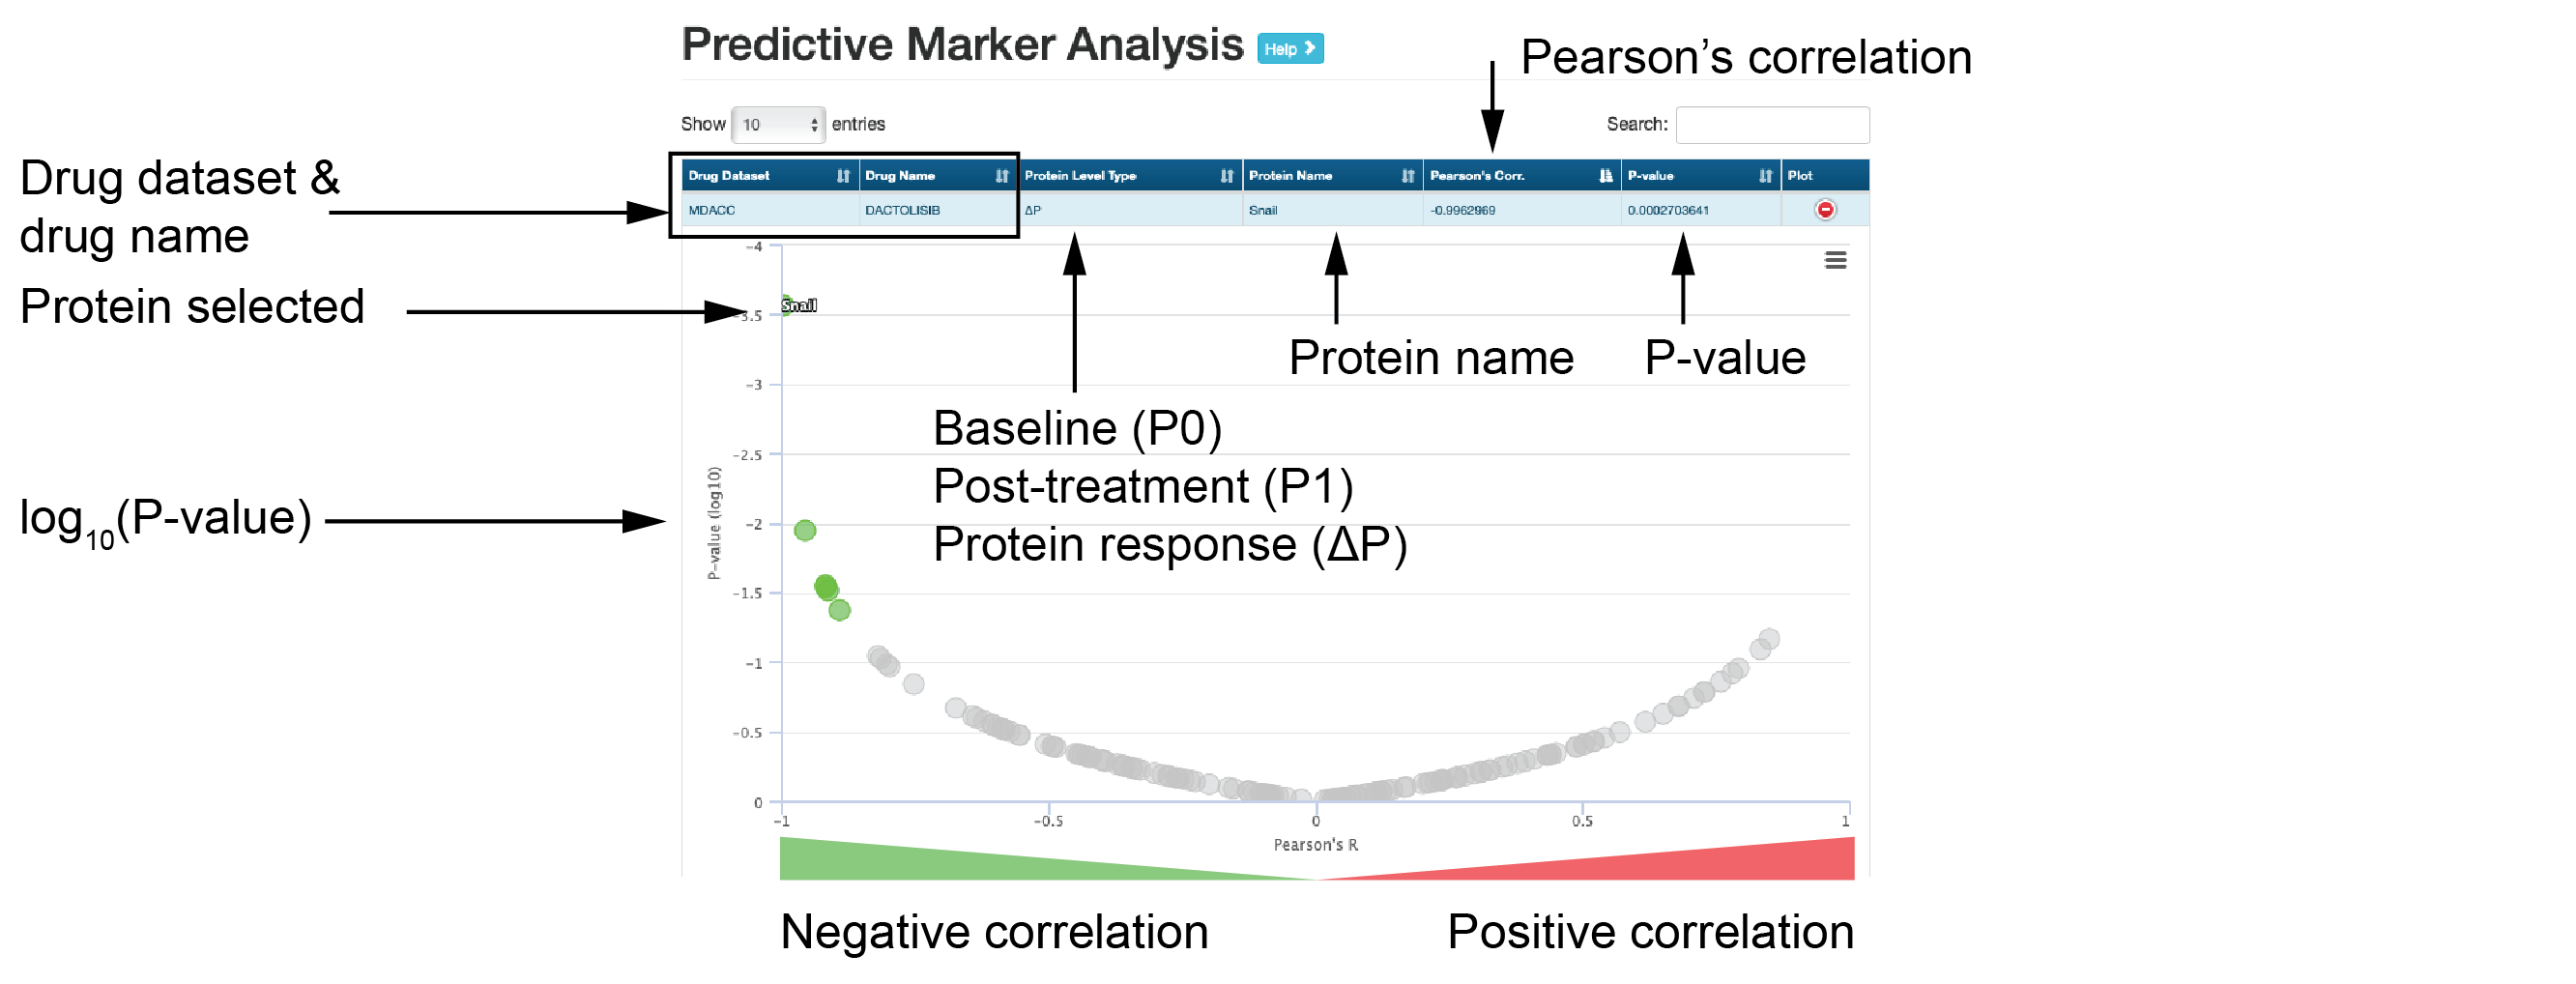 An example of predictive marker analysis